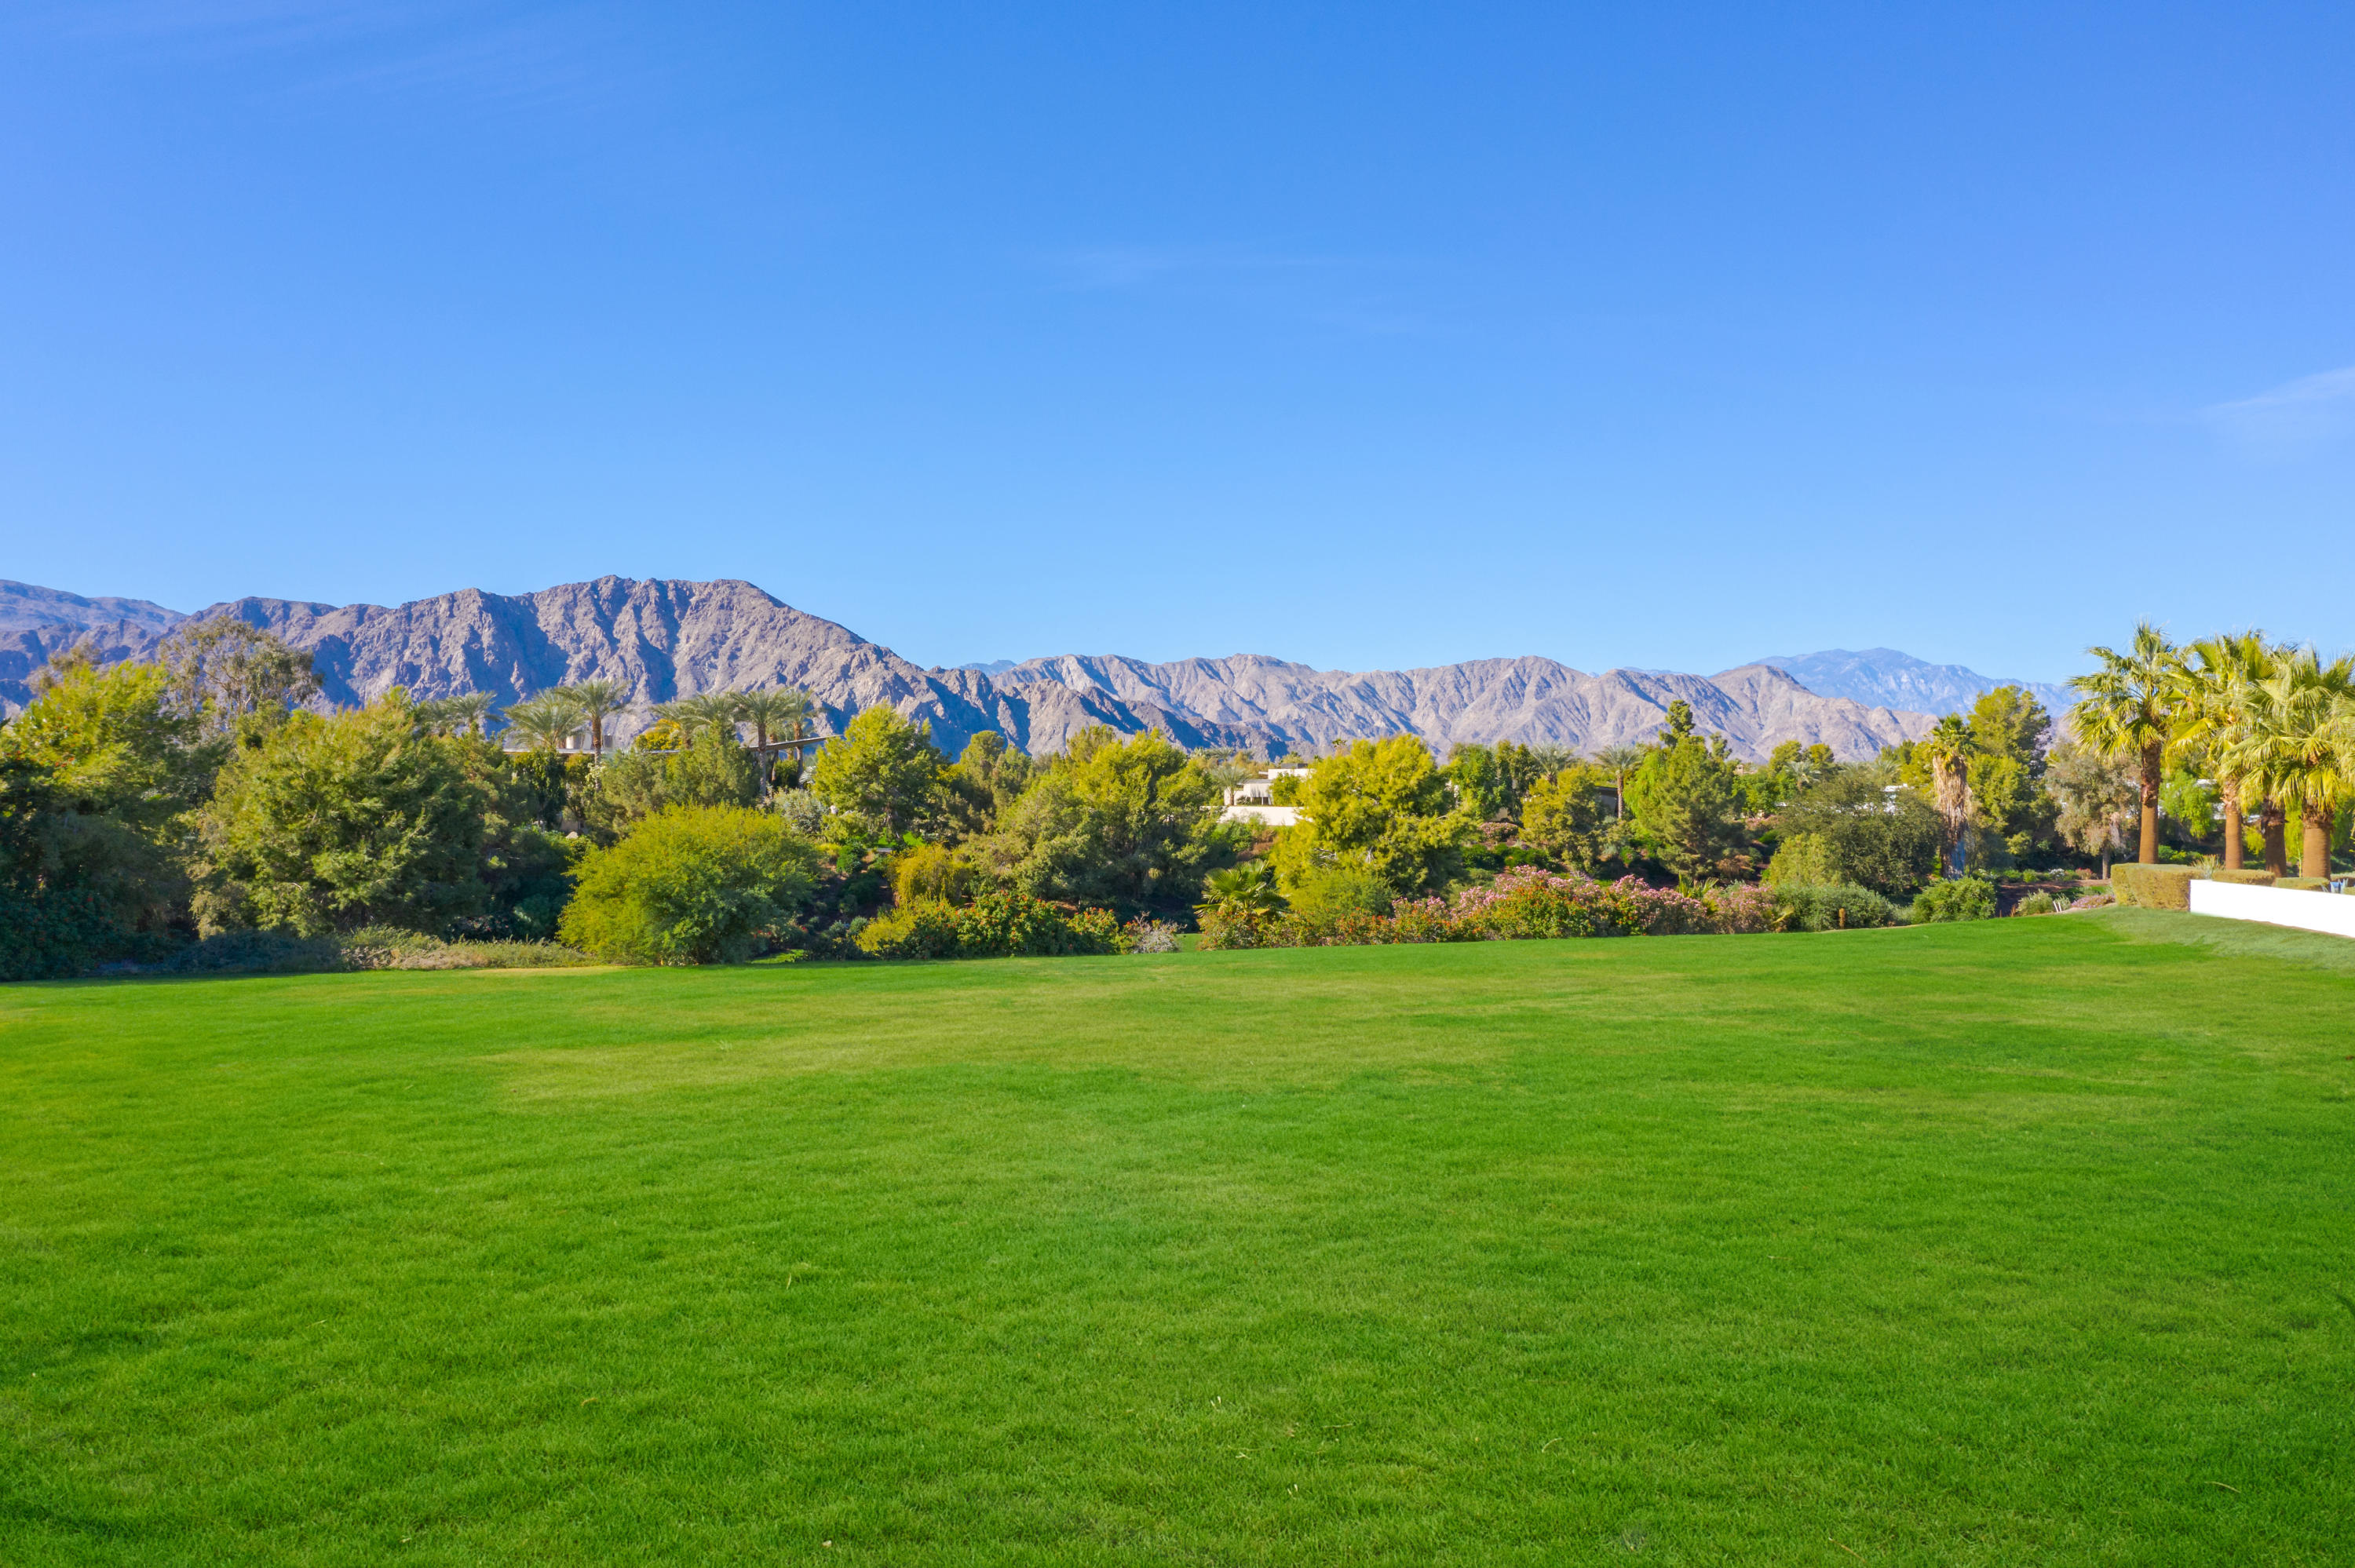 a view of a grassy field with mountain in the background